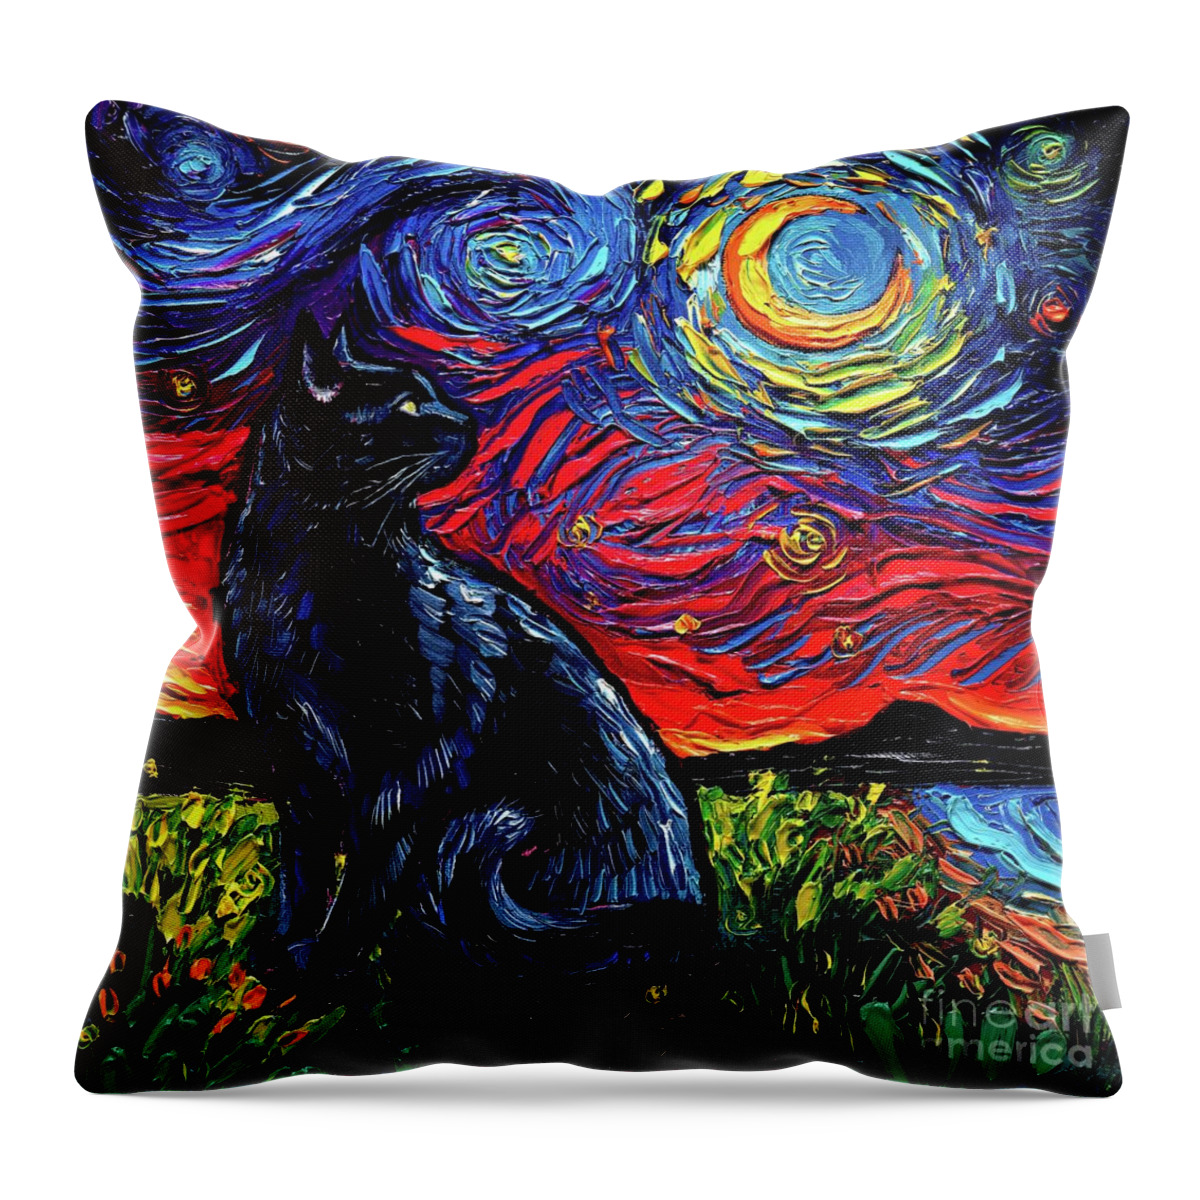 Black Cat Night 2 Throw Pillow featuring the painting Black Cat Night 2 by Aja Trier